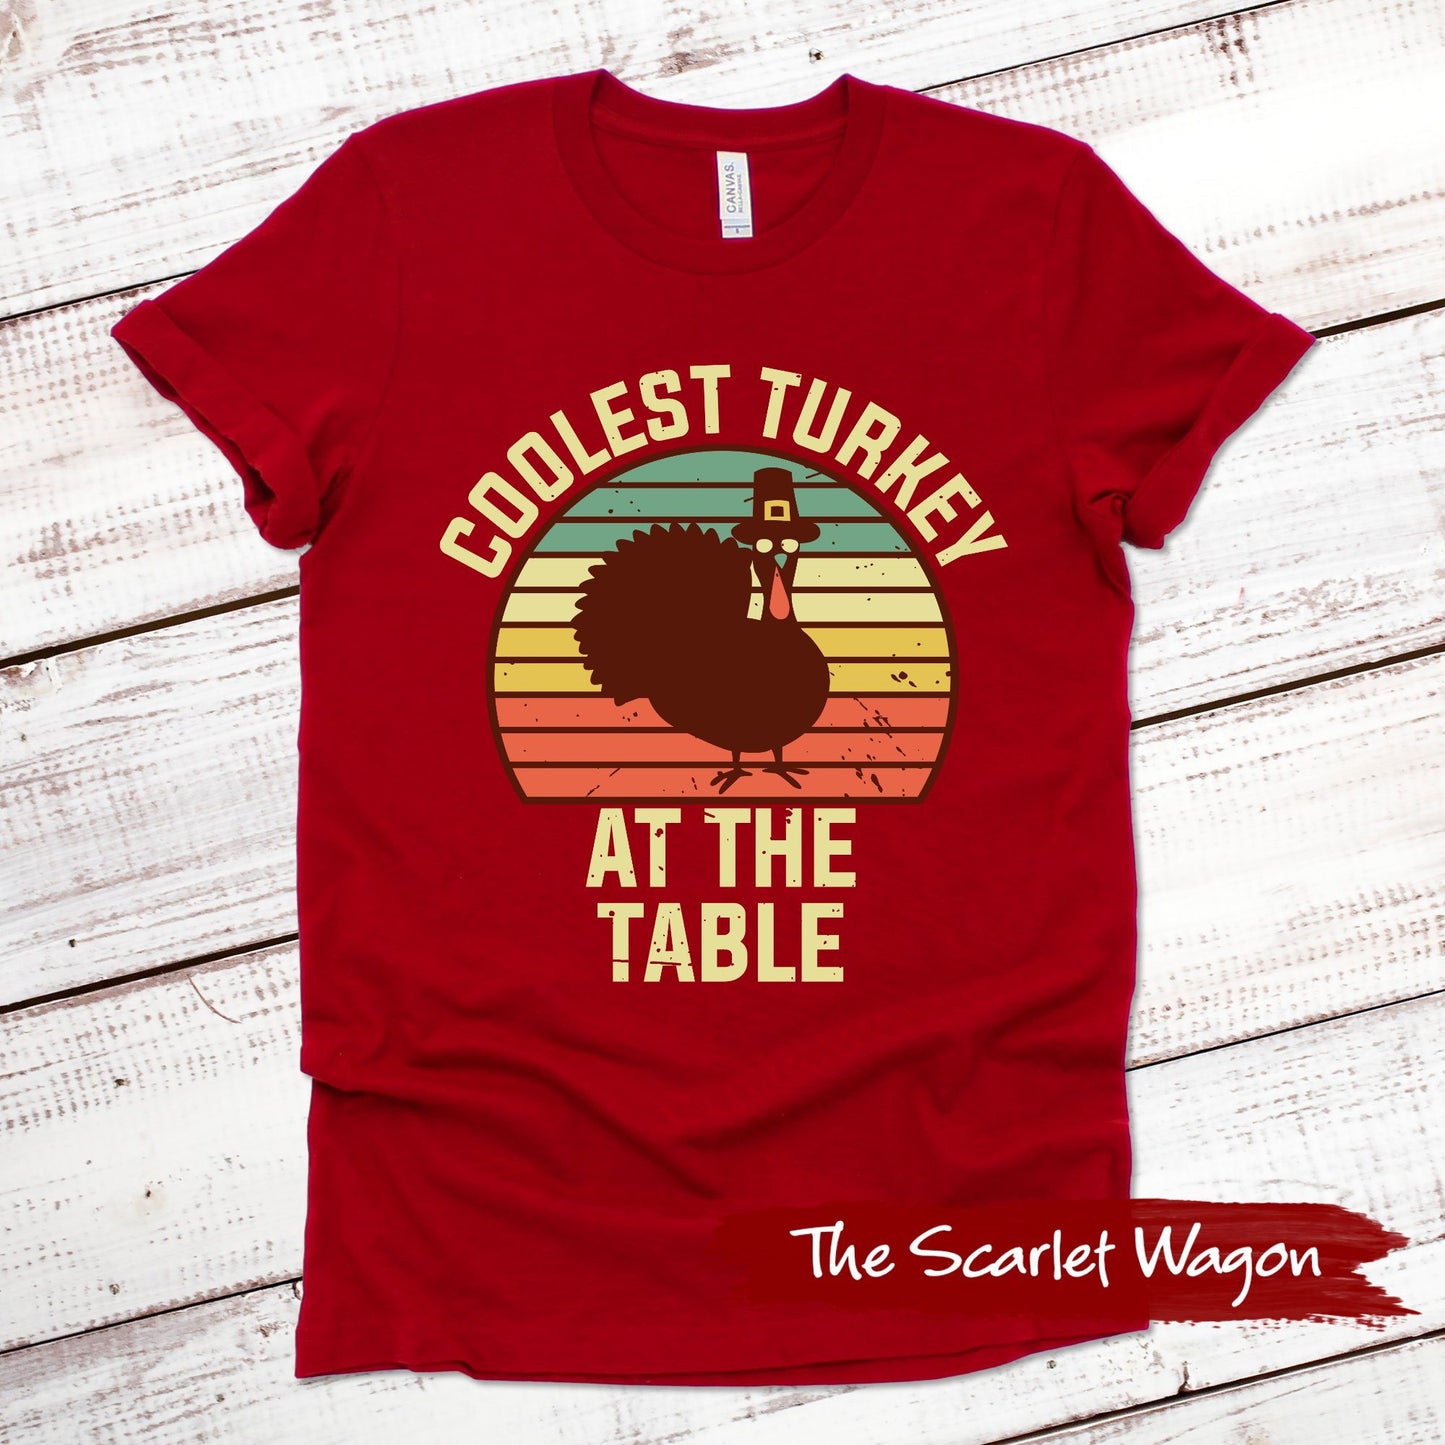 Coolest Turkey at the Table Fall Shirts Scarlet Wagon Red XS 